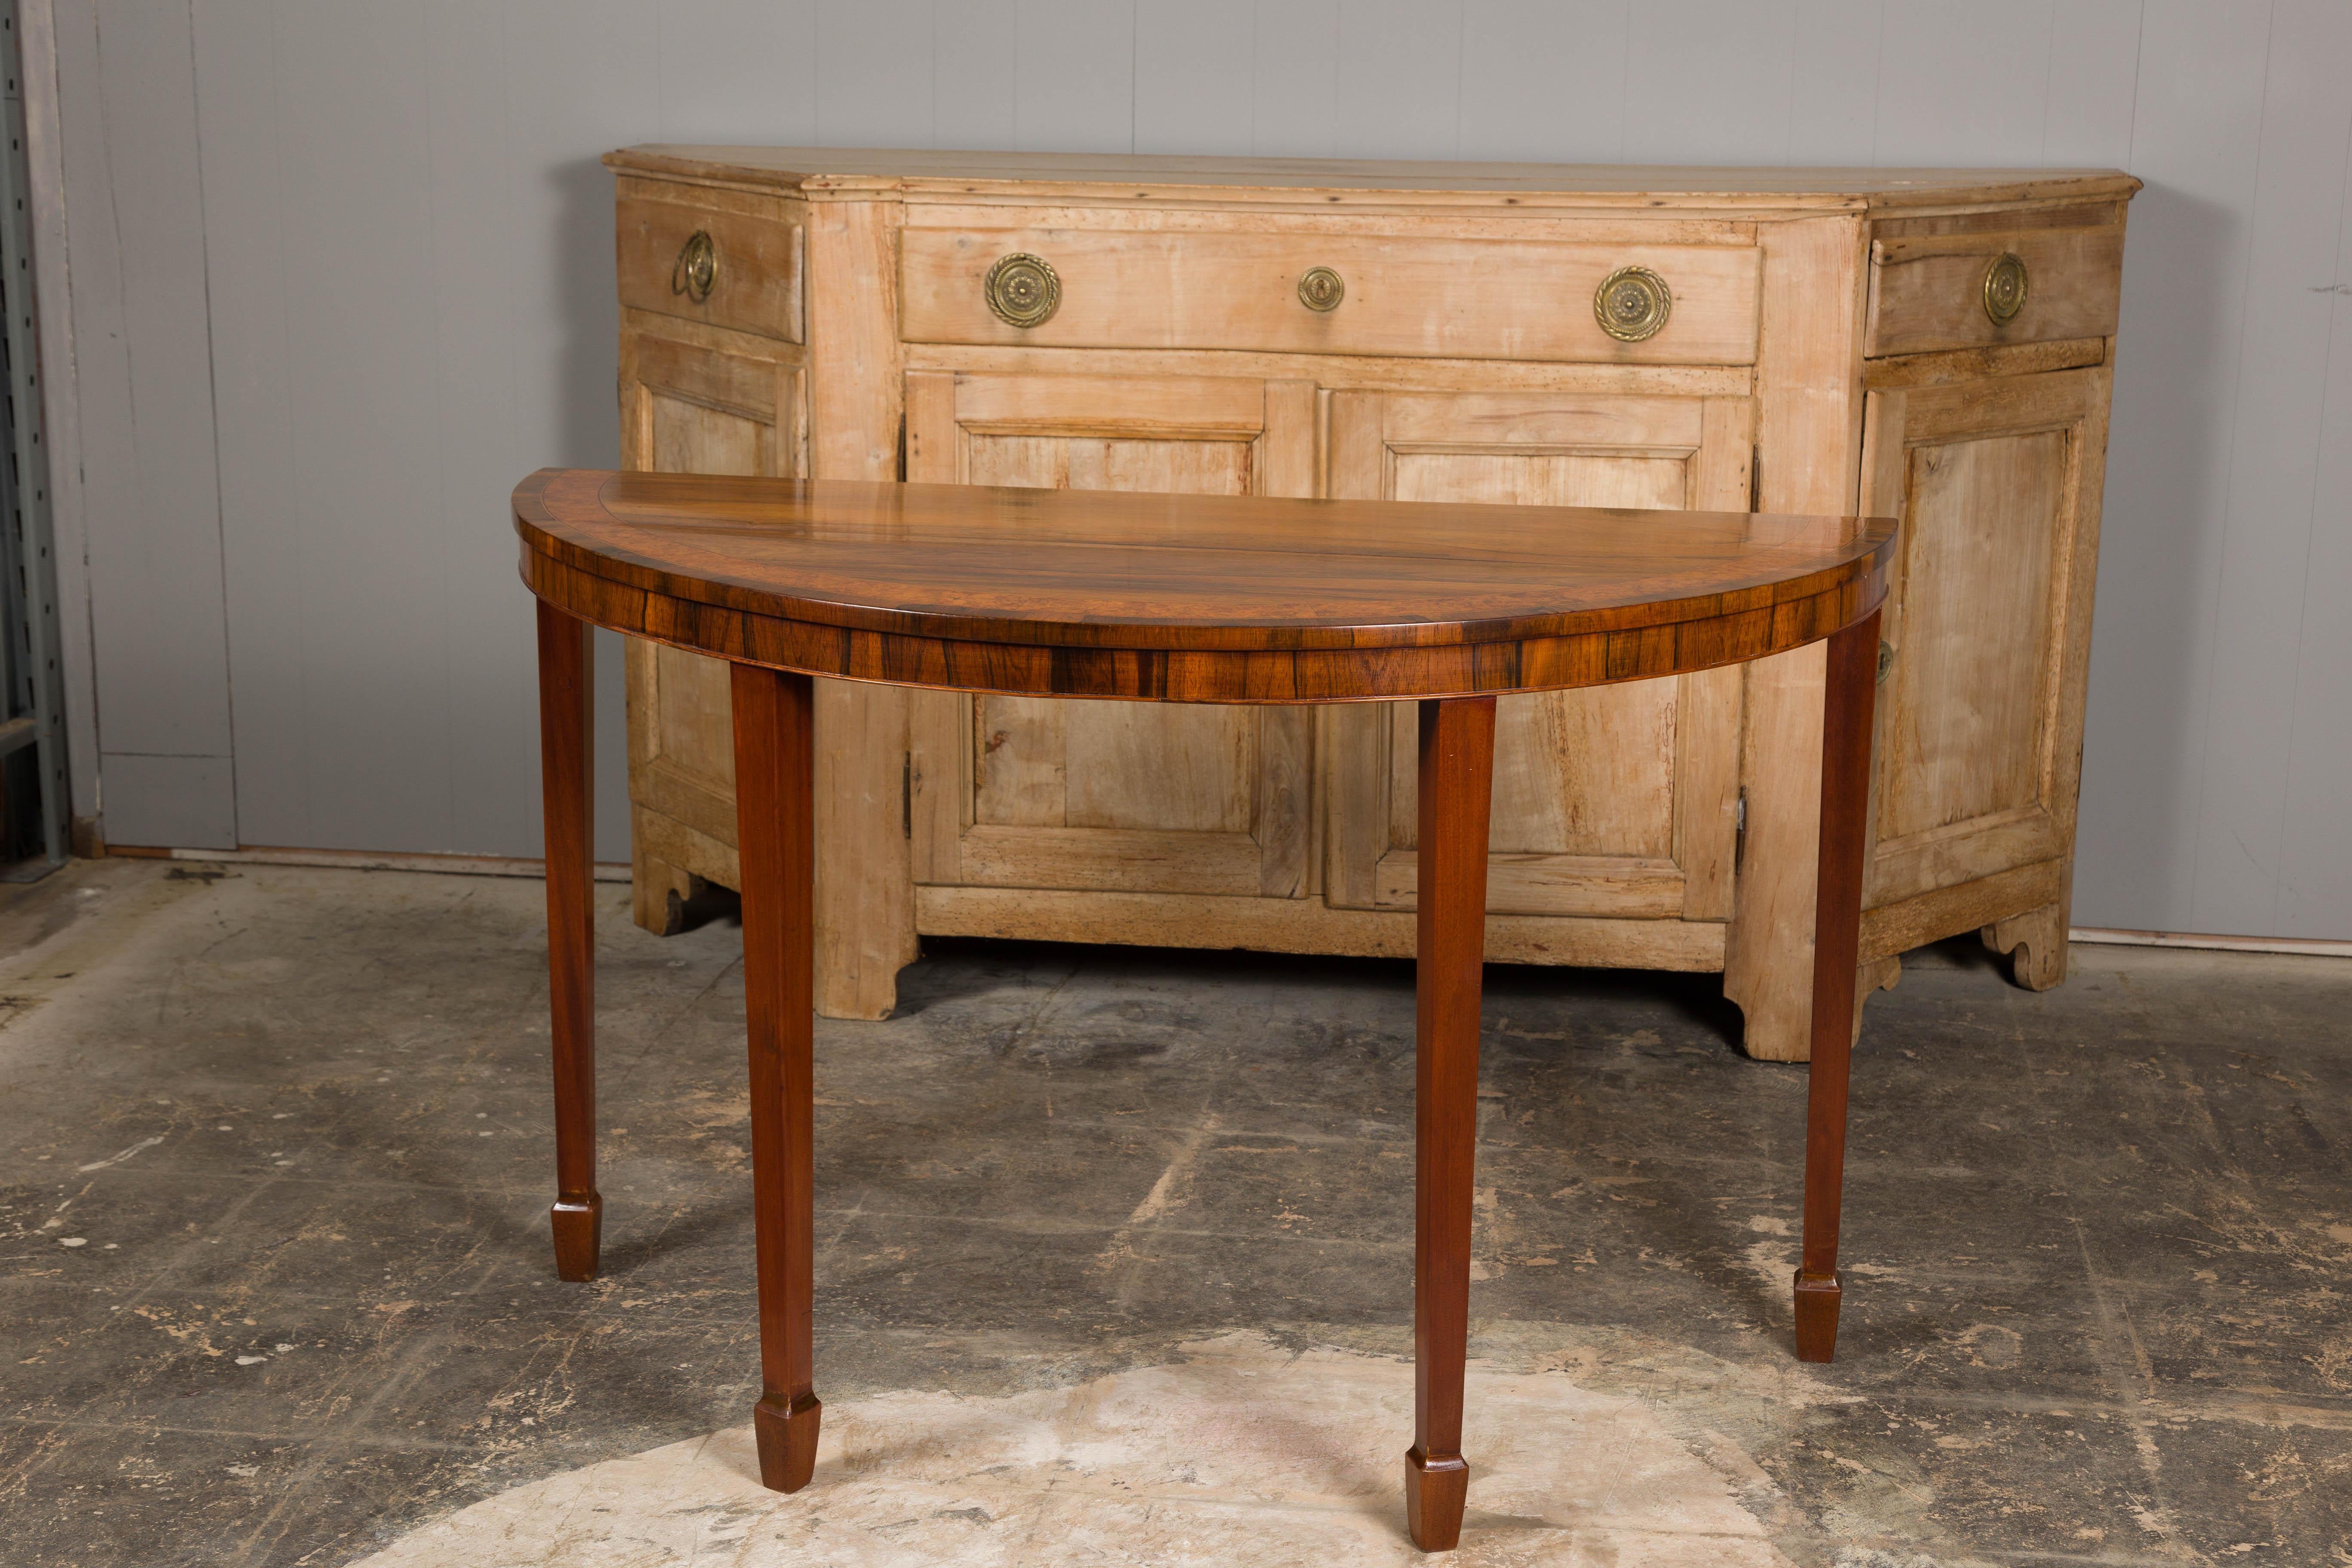 English 19th Century Mahogany Demilune Console Tables with Tapered Legs, a Pair For Sale 2